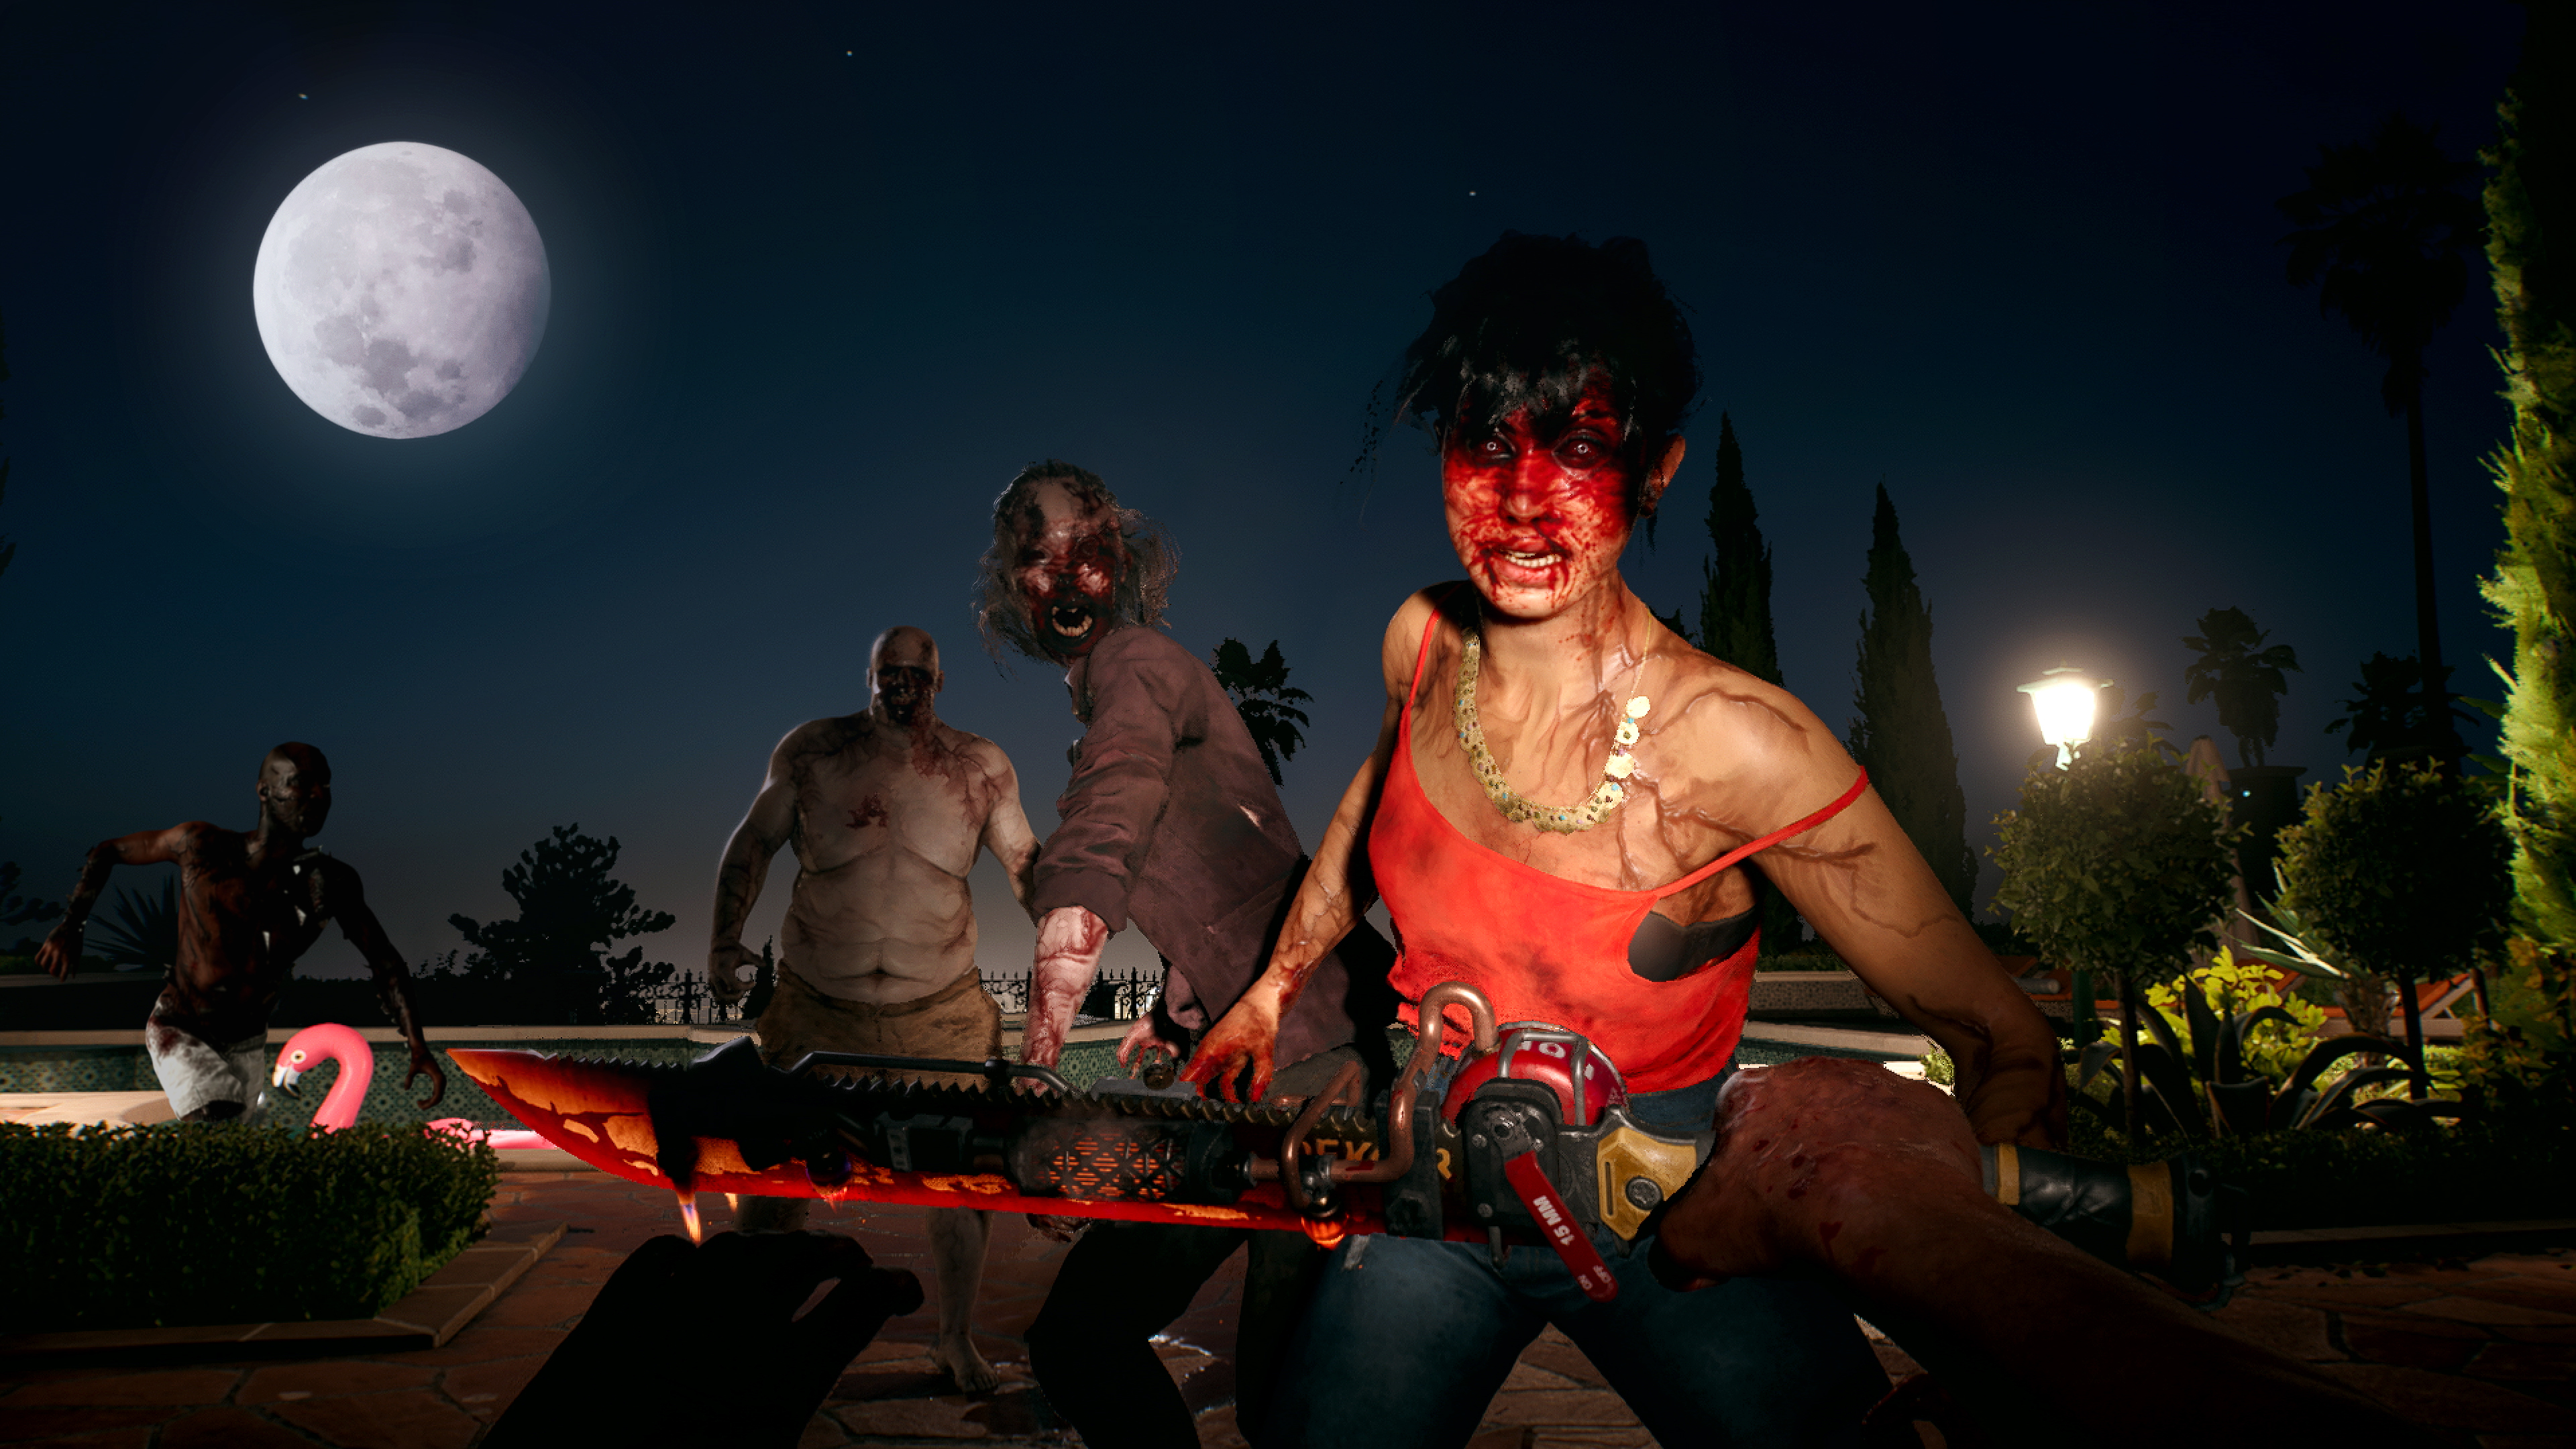 Dead Island 2’s bad reputation actually helped the developers